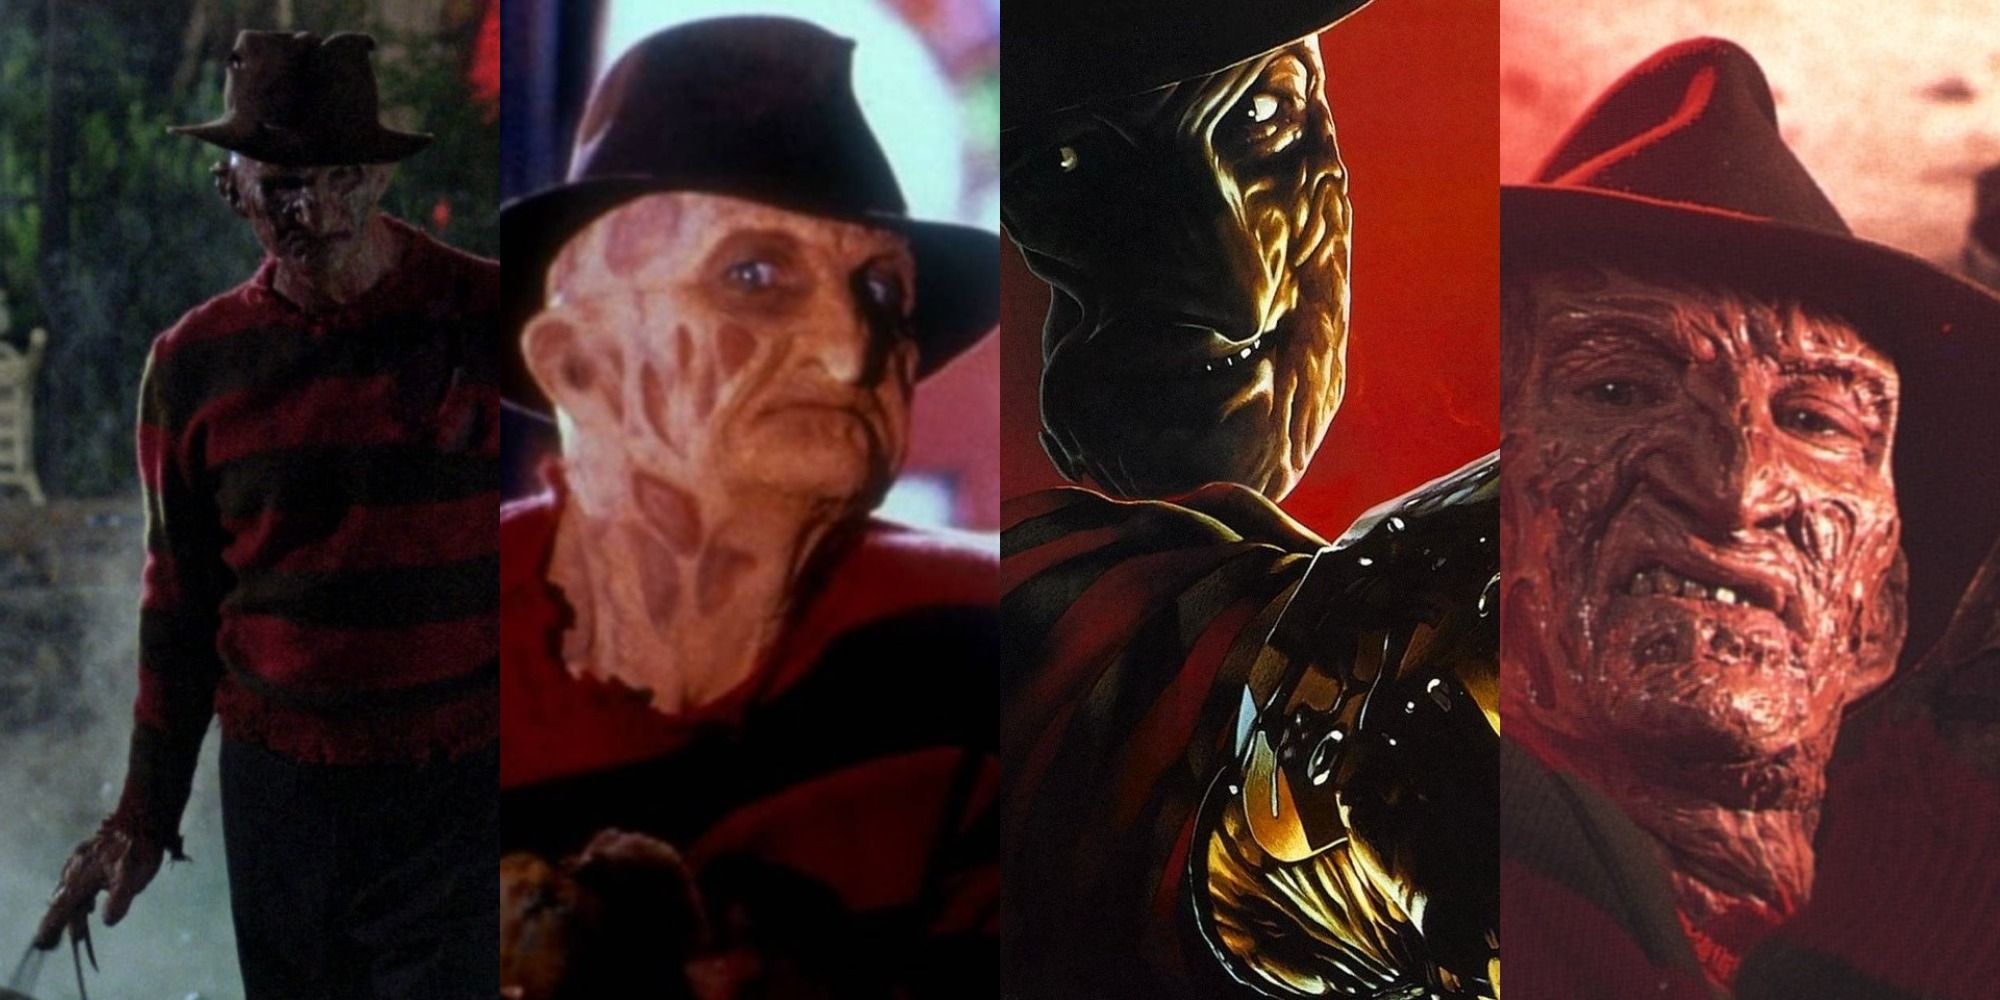 Four images of Freddy from various A Nightmare on Elm Street movies